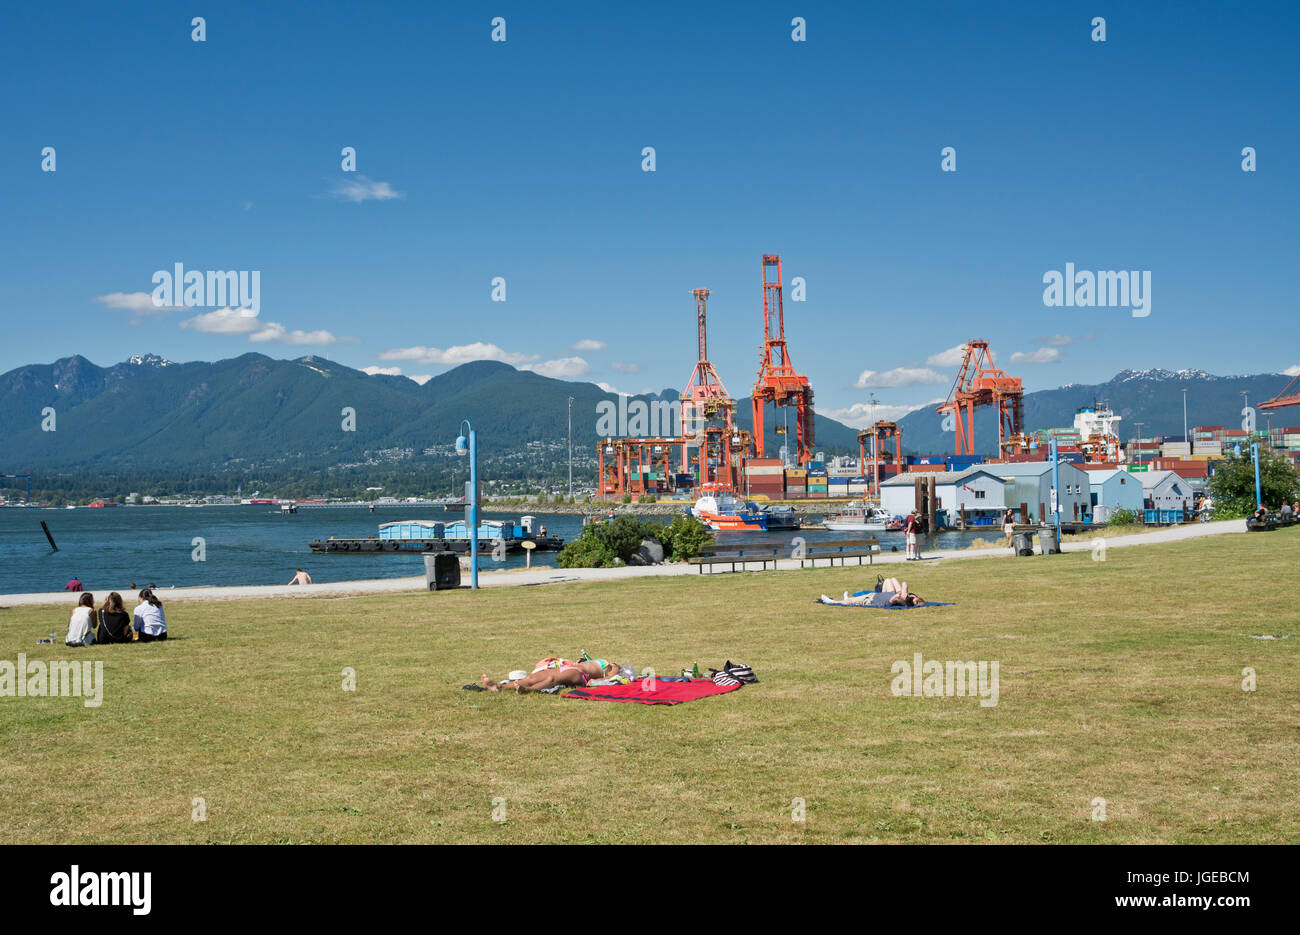 Crab Park in Vancouver BC- people sunbathing and enjoying the water views.  Loading docks at Port of Vancouver. Stock Photo